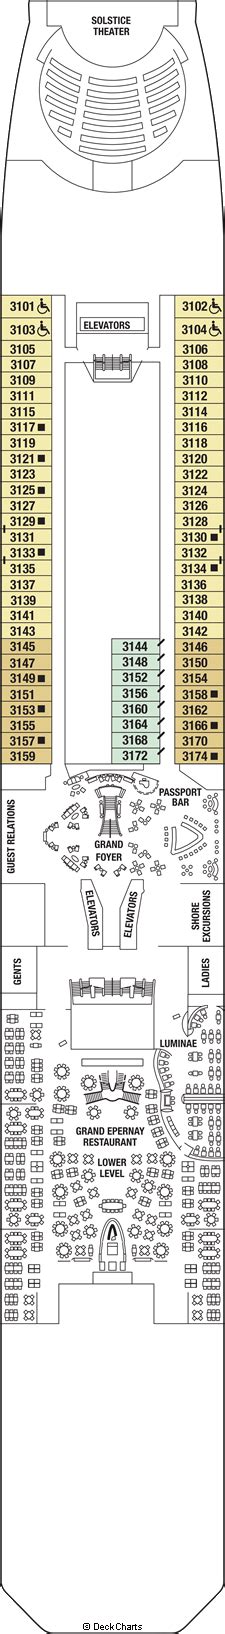 Celebrity Solstice Deck Plans Ship Layout Staterooms And Map Cruise